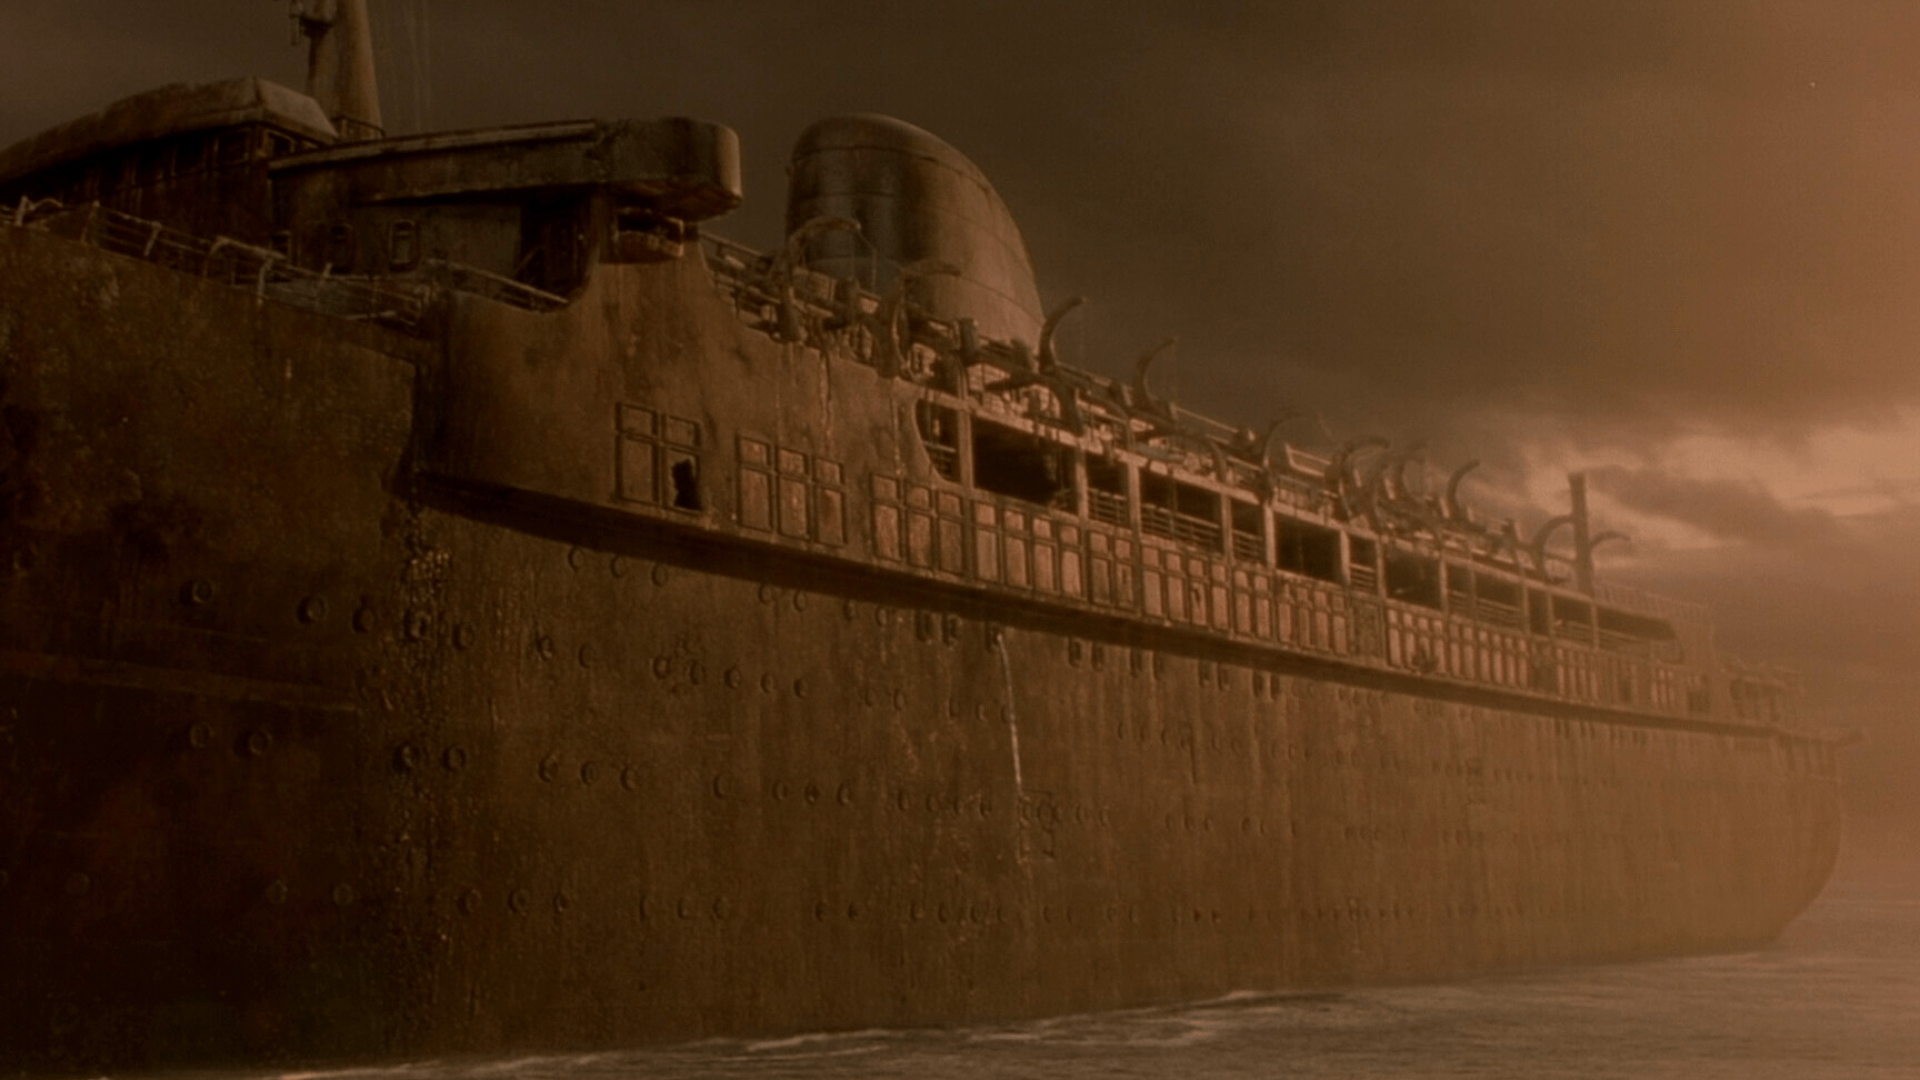 Ghost Ship: A shipwreck at the coast of the ocean, The front part of a commercial vessel. 1920x1080 Full HD Wallpaper.